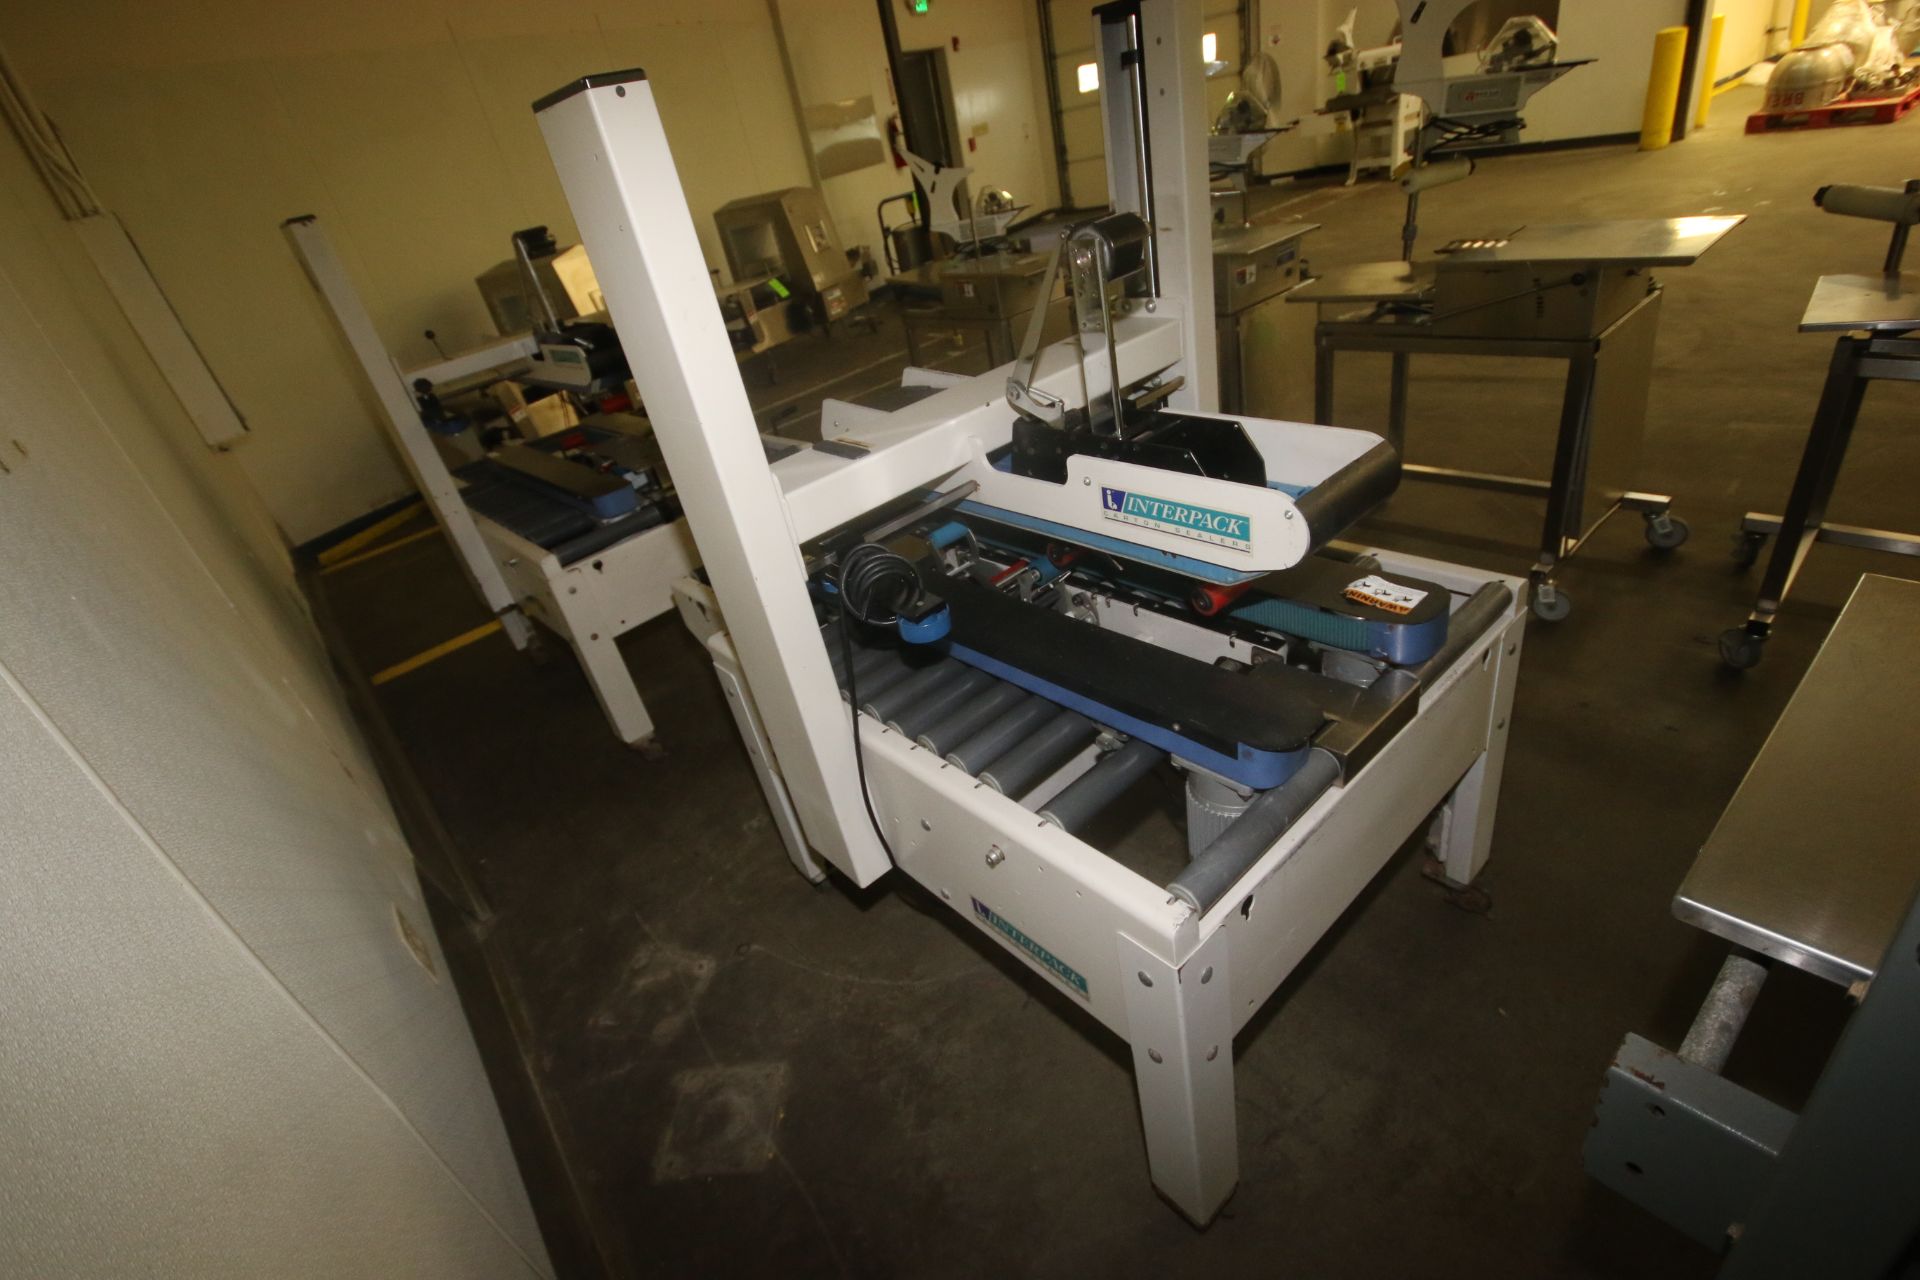 InterPack Top & Bottom Case Sealer, M/N USA 2024-SB/3, S/N H03 T544 007, 115 Volts, 1 Phase, with - Image 4 of 5